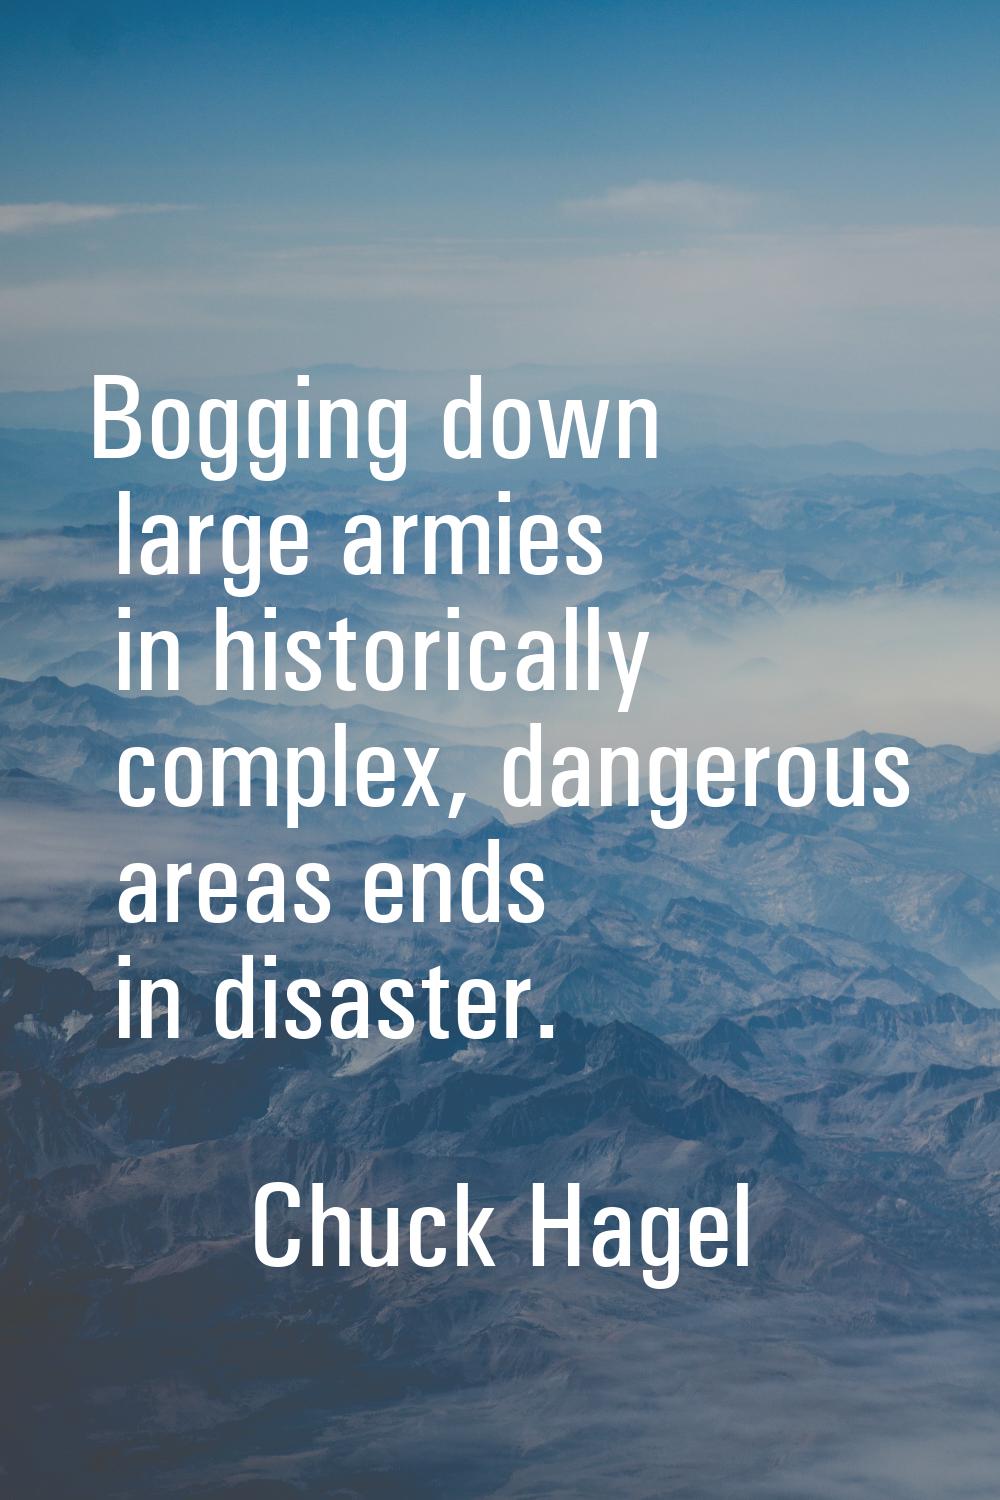 Bogging down large armies in historically complex, dangerous areas ends in disaster.